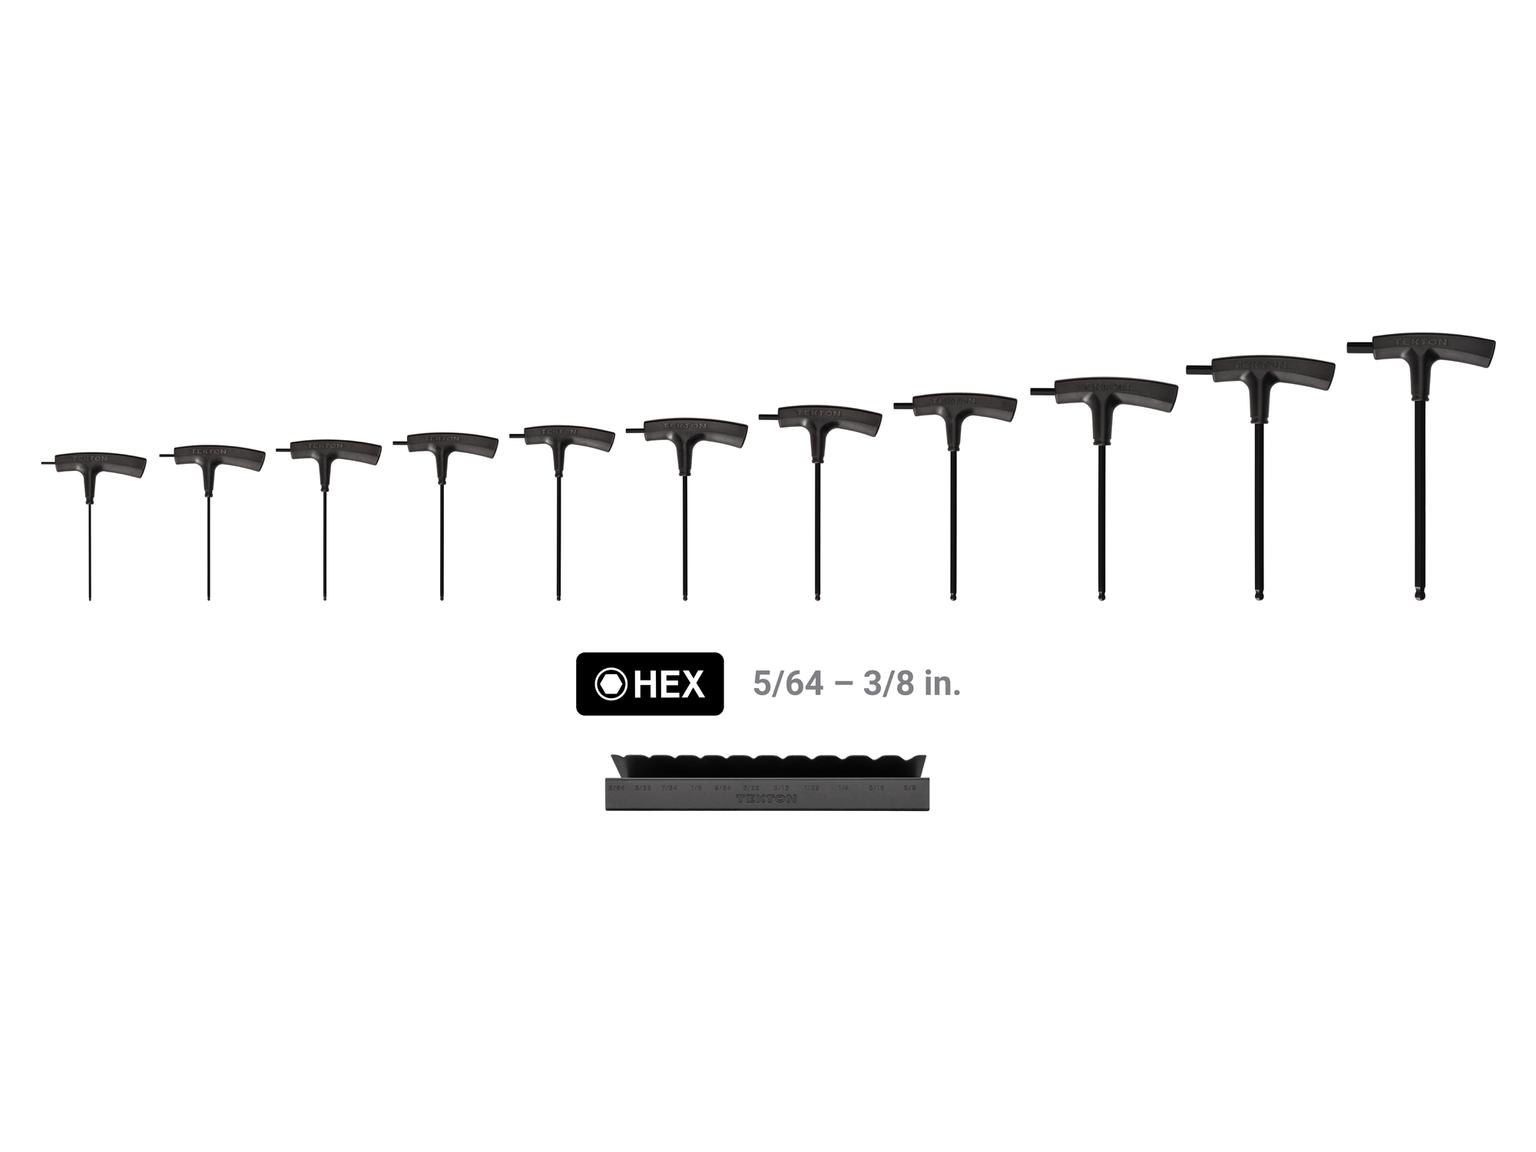 TEKTON KTX92101-T Ball End Hex T-Handle Key Set with Stand, 11-Piece (5/64-3/8 in.)